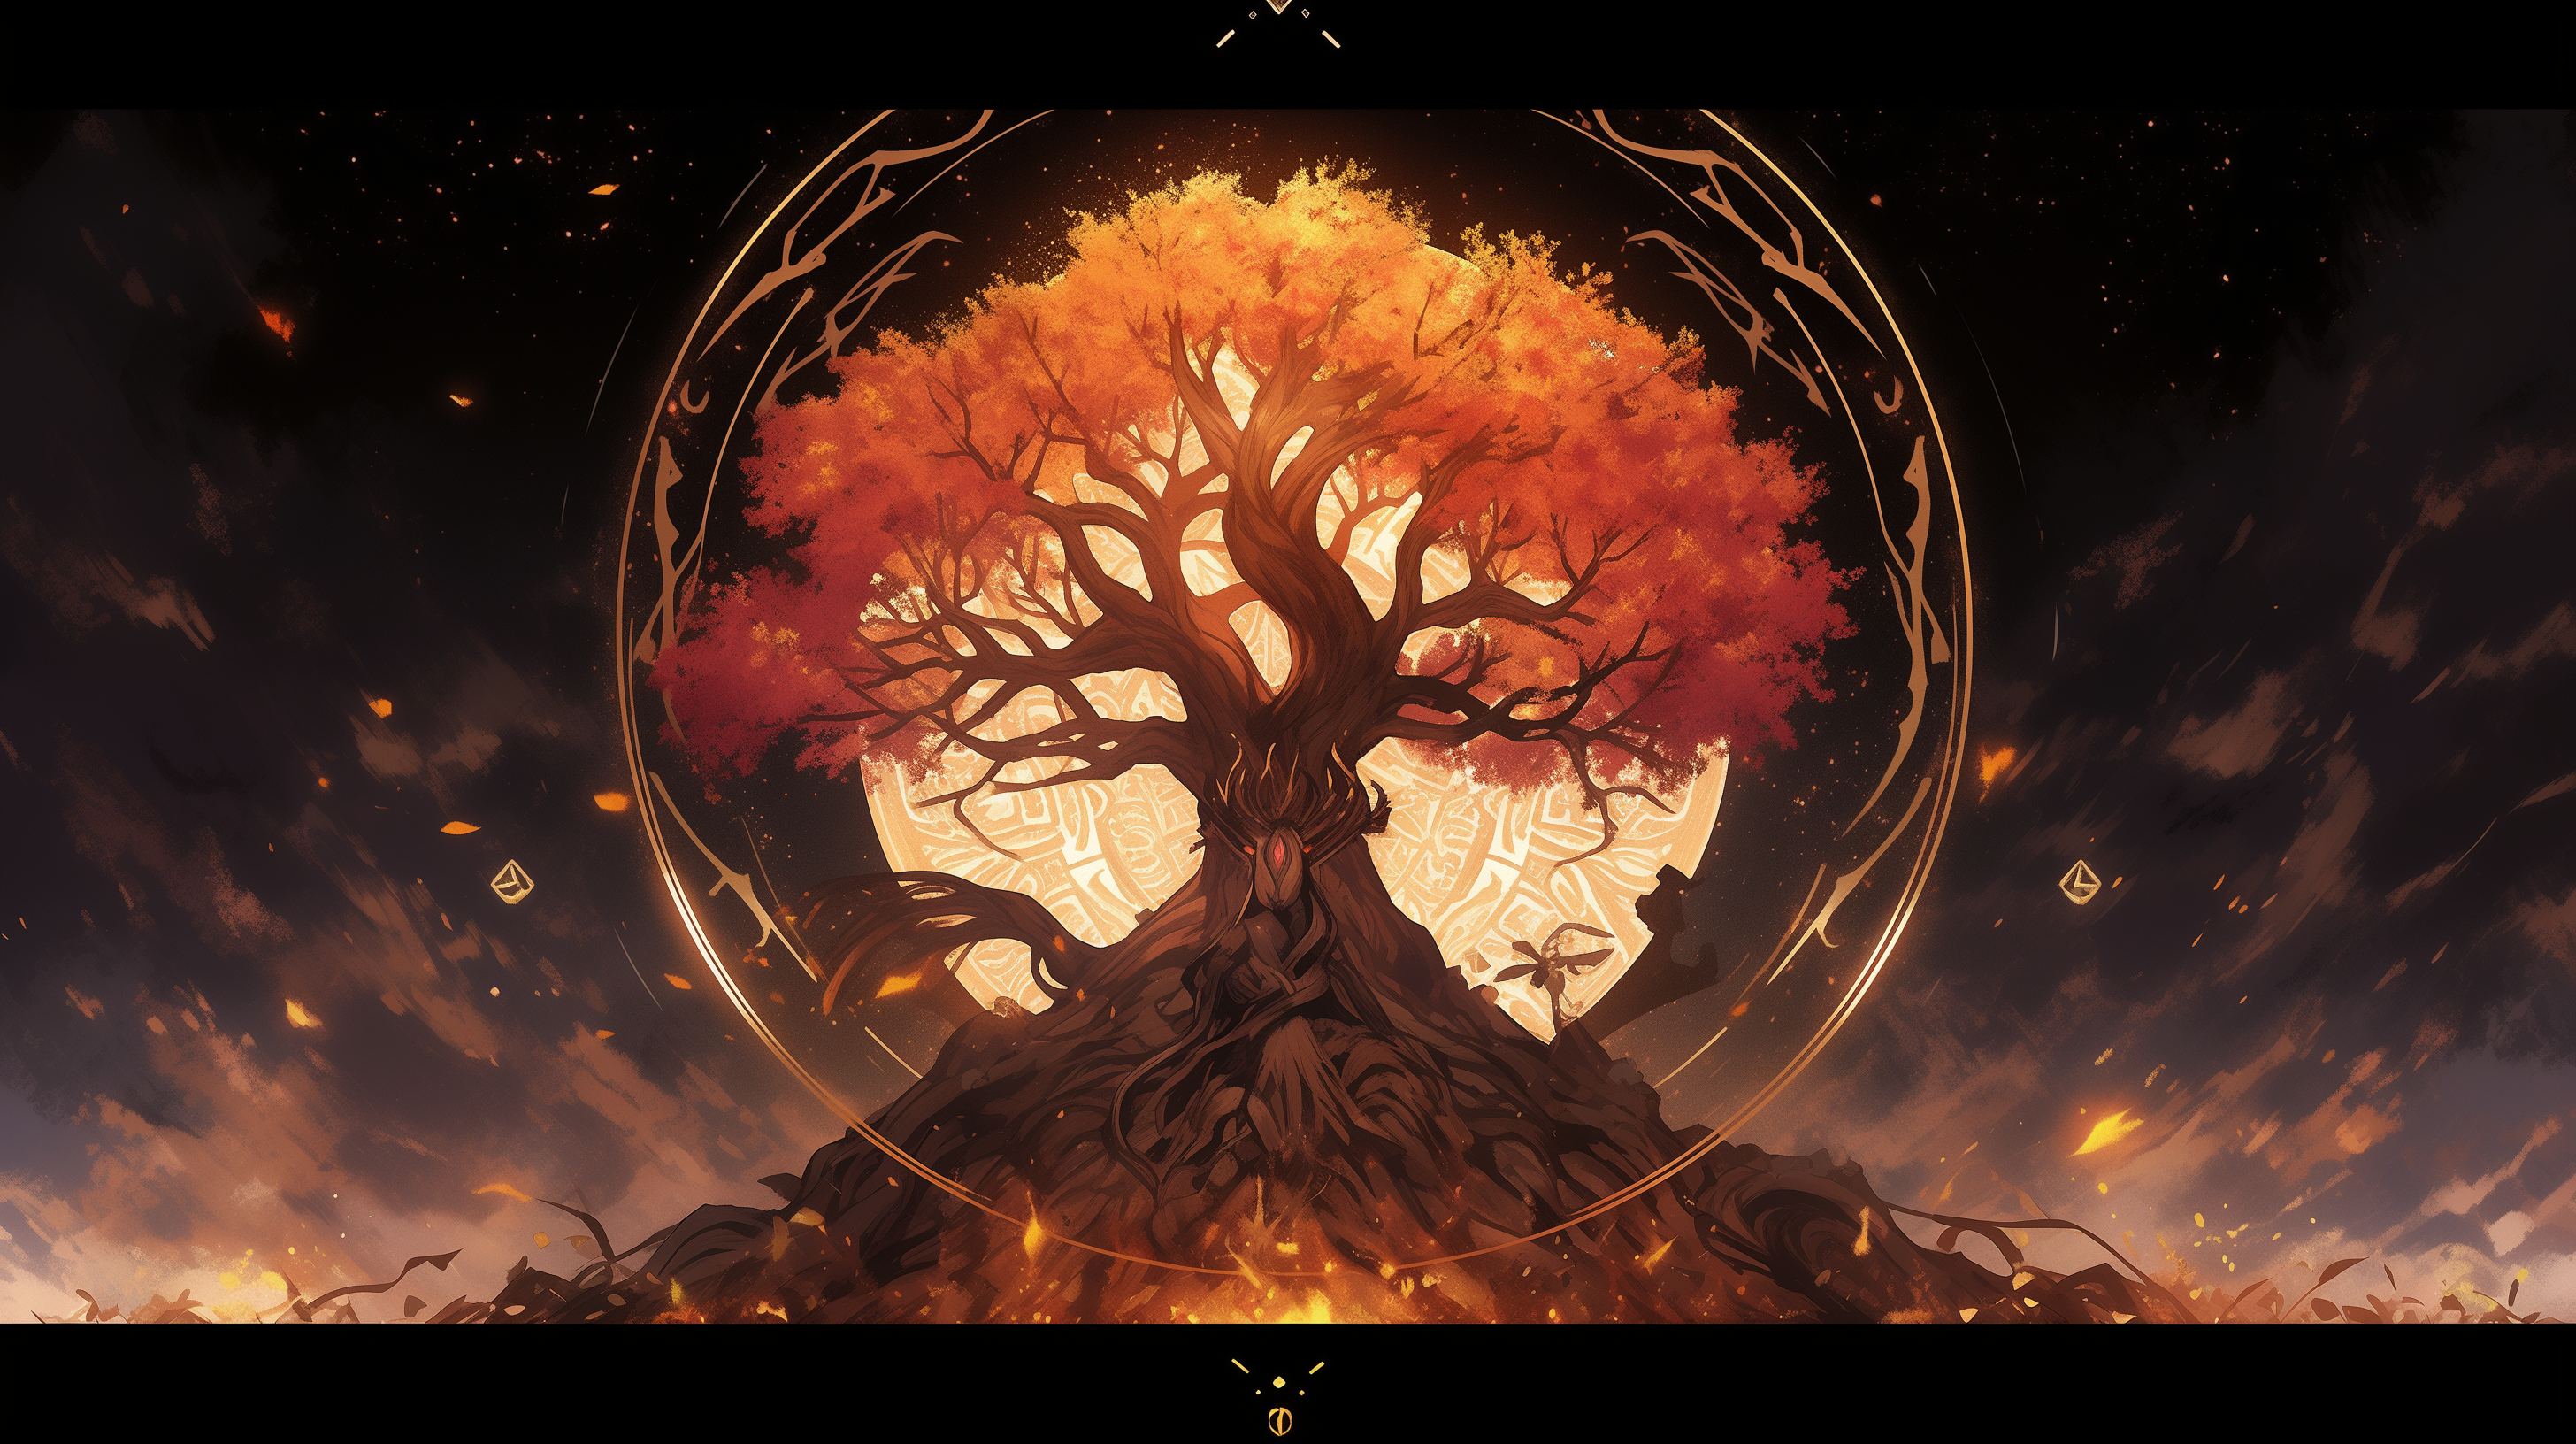 HD wallpaper of the mythical Yggdrasil tree surrounded by celestial patterns, ideal as a desktop background.